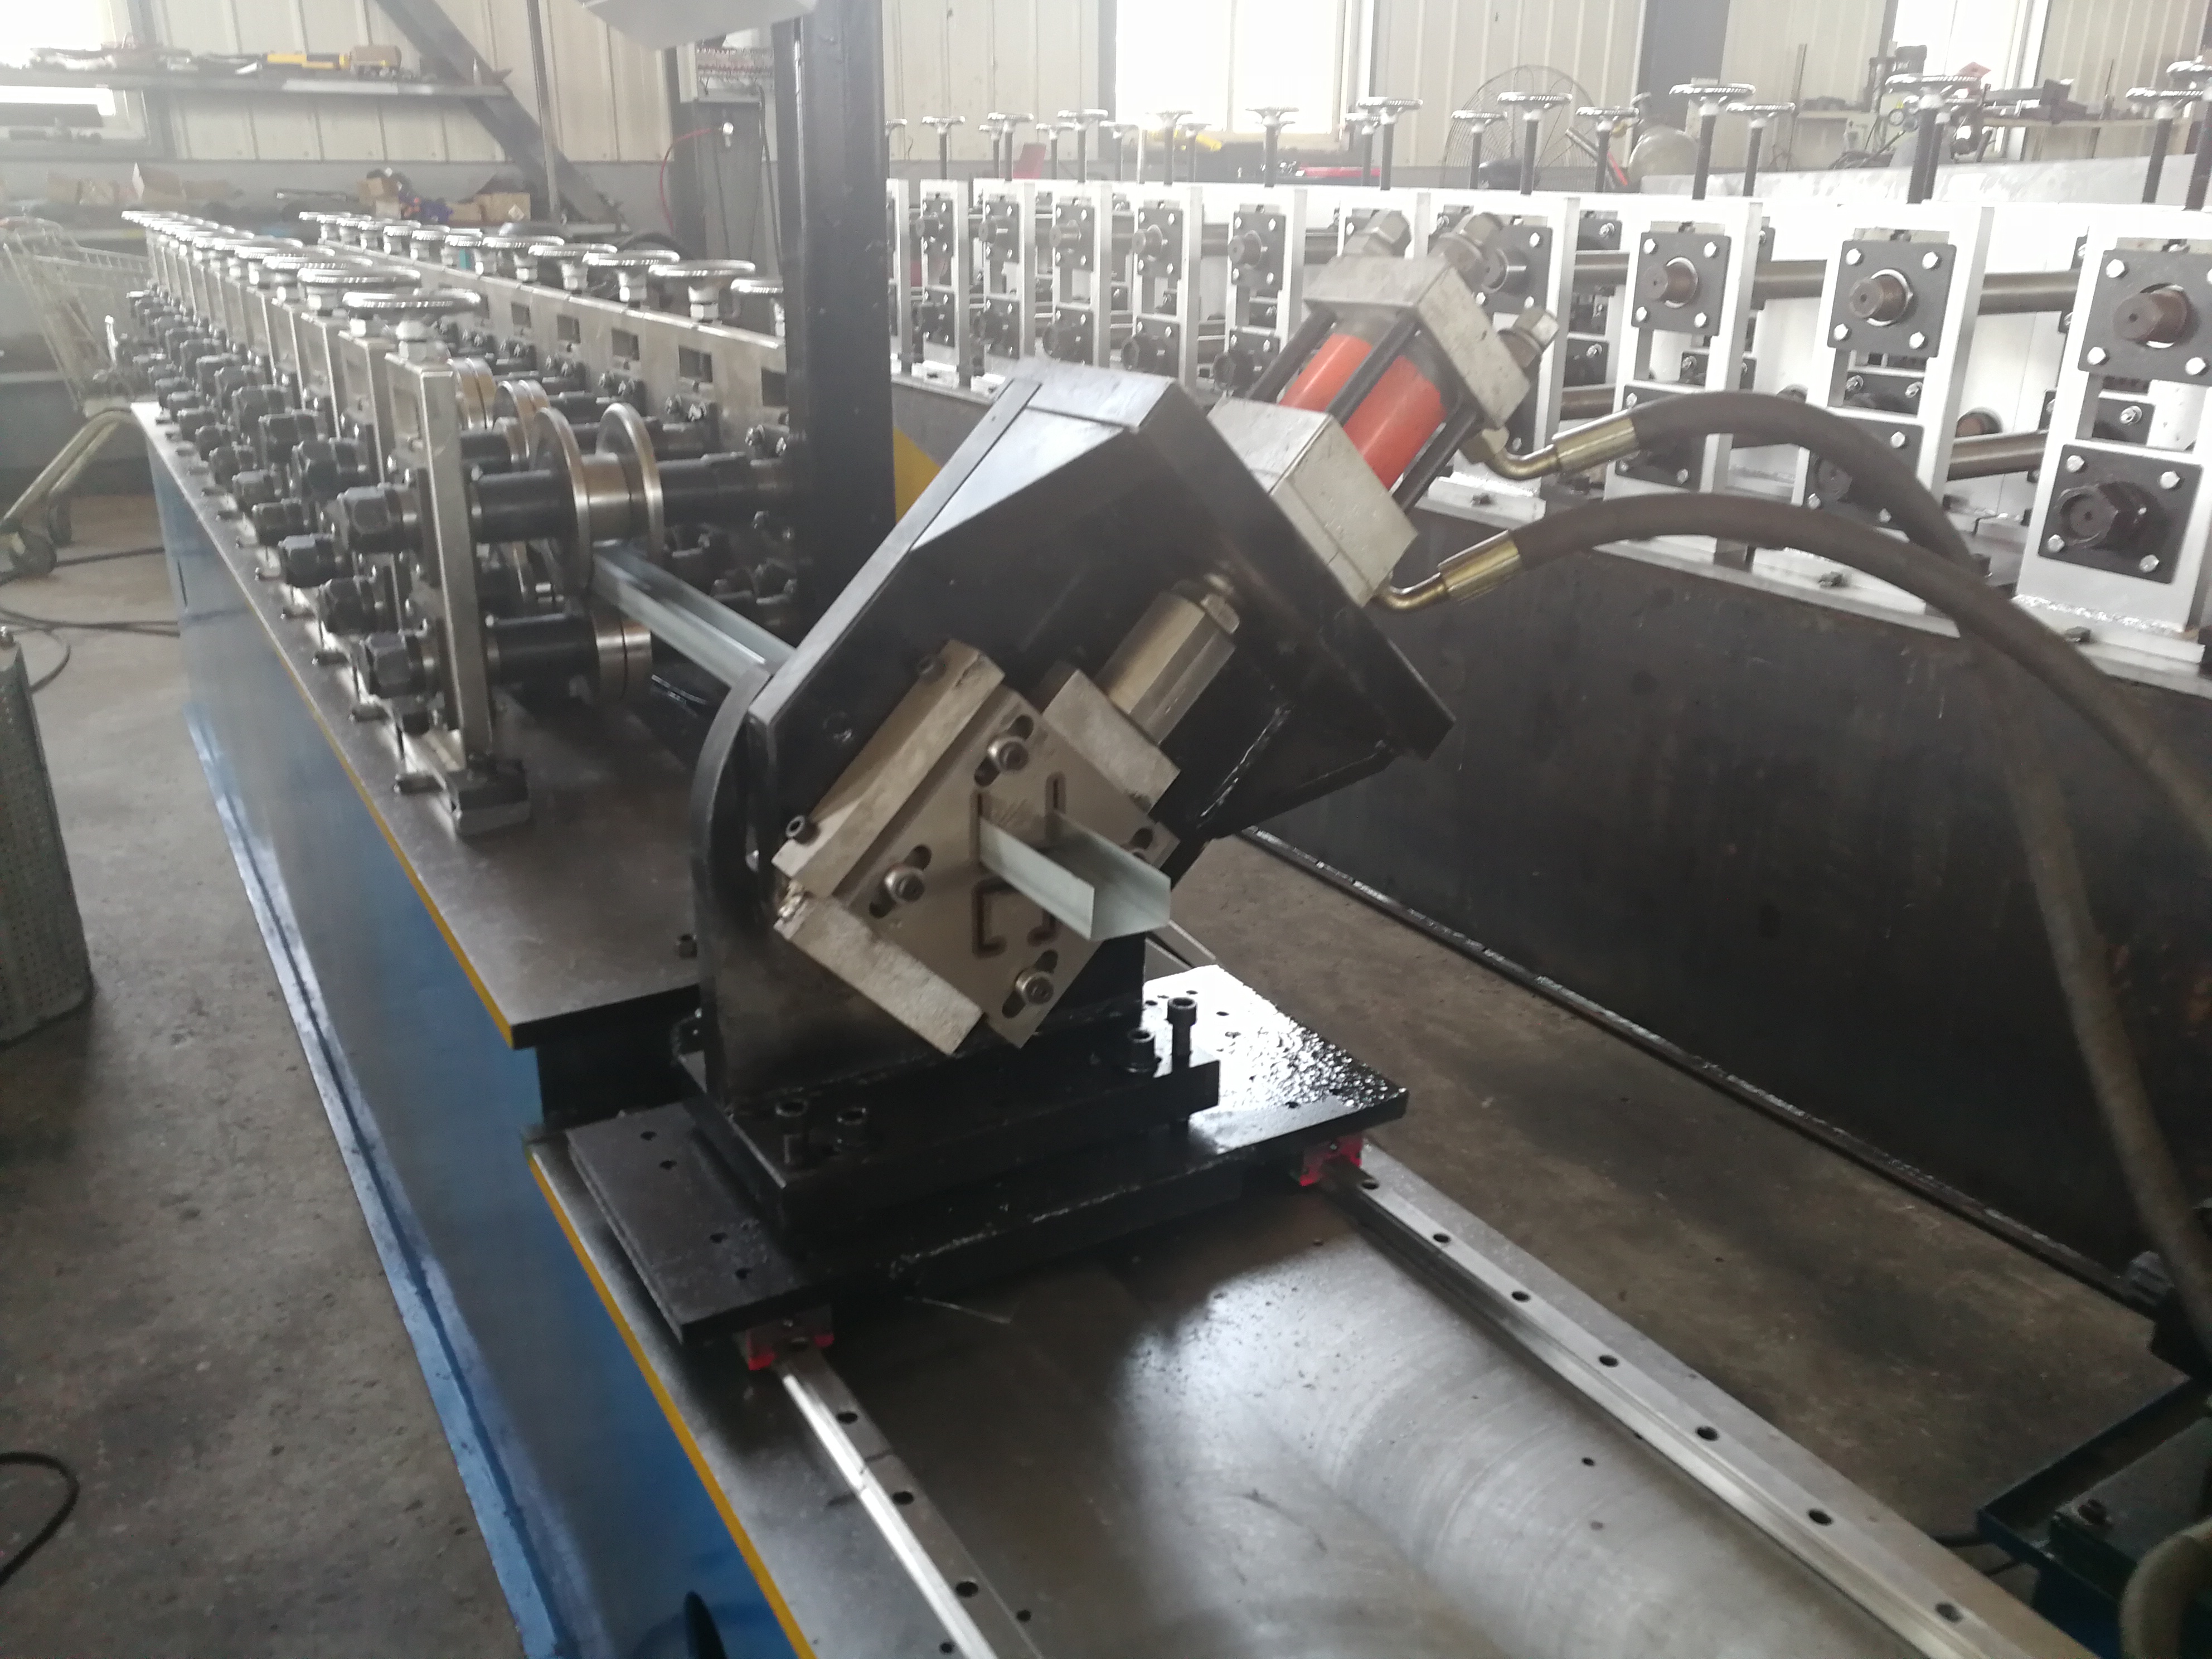 Metal strut channel slotted angle making and roll forming machines